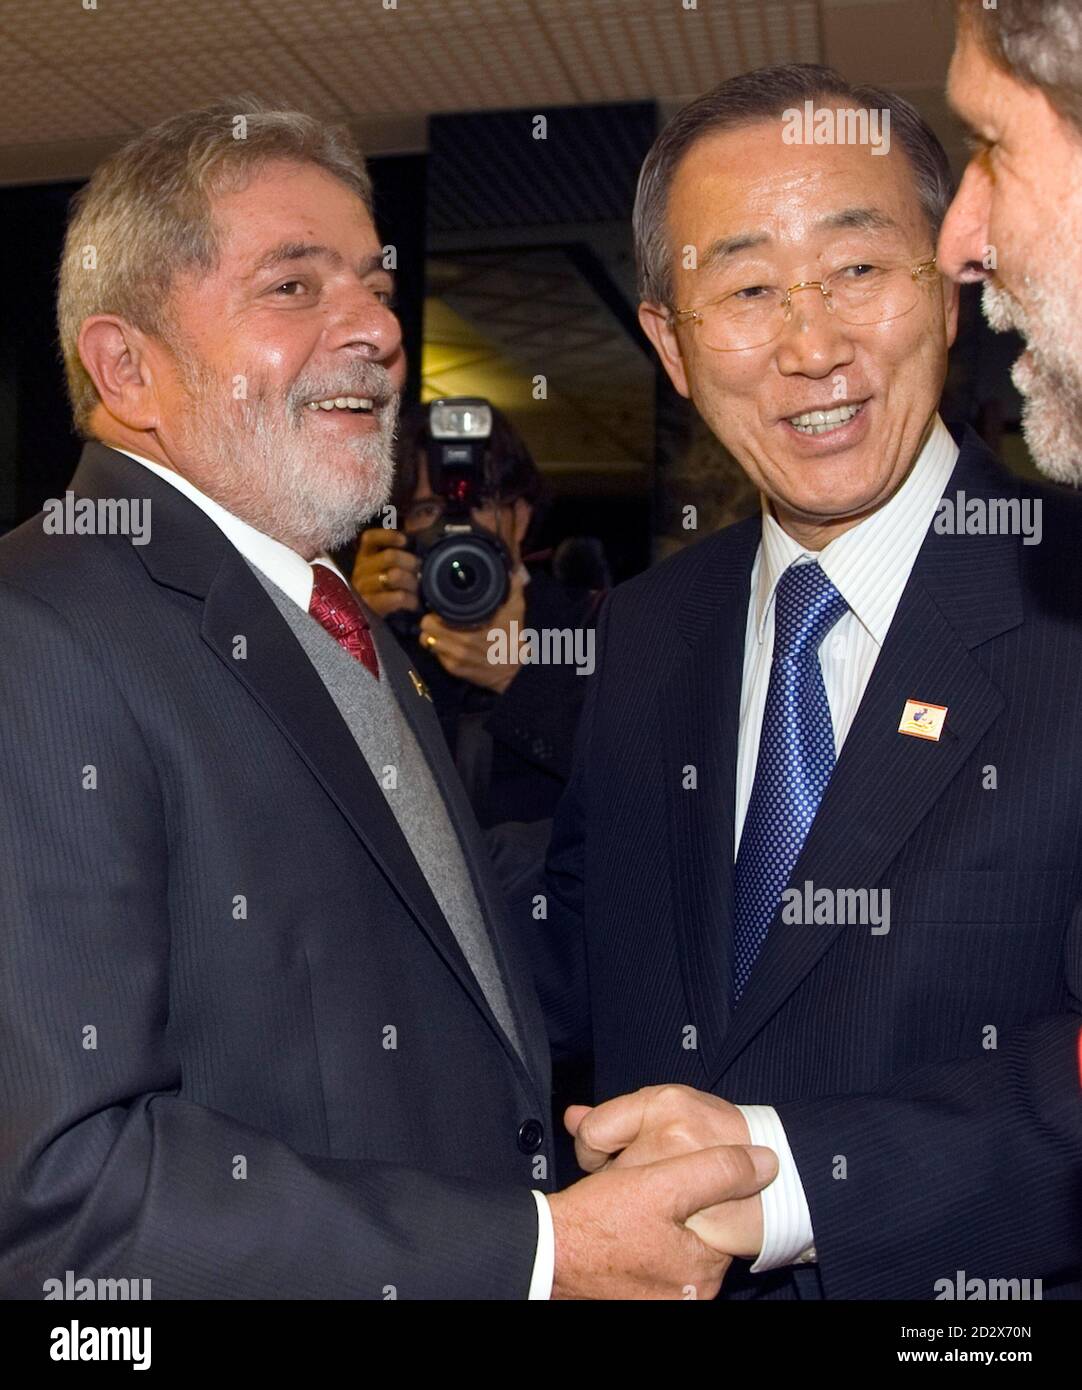 Brazil's President Luiz Inacio Lula da Silva (L) and Ban Ki-moon (C), Secretary-General of the United Nations, talk during a food summit of Latin American and African heads of state in Rome November 15, 2009. World leaders and government officials will meet in Rome on Monday for a three-day U.N. World Food Summit on Food Security. REUTERS/Alessandro Bianchi   (ITALY POLITICS FOOD) Stock Photo